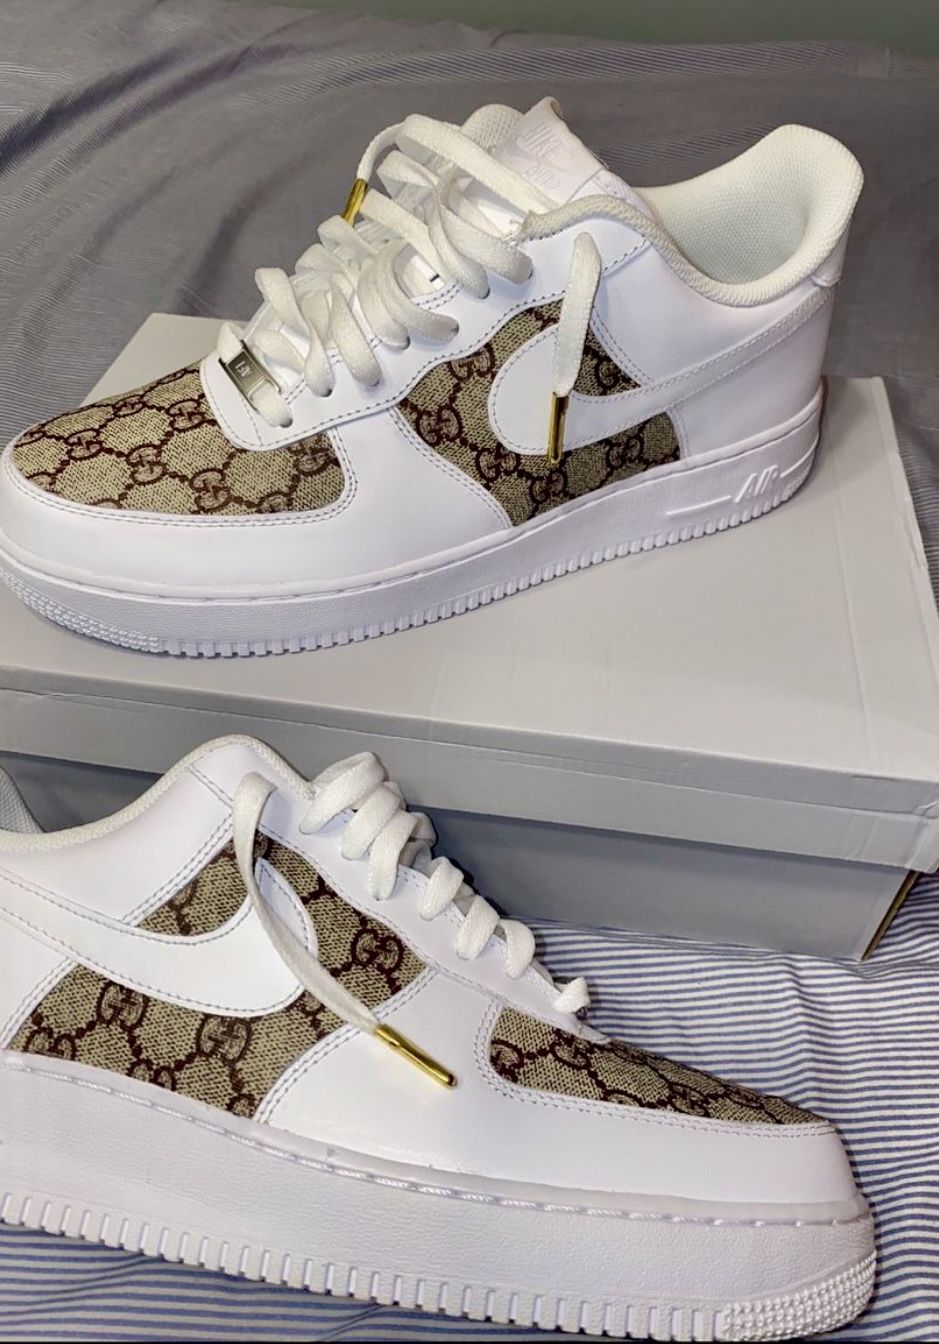 Gucci Air Force 1s (11.5)